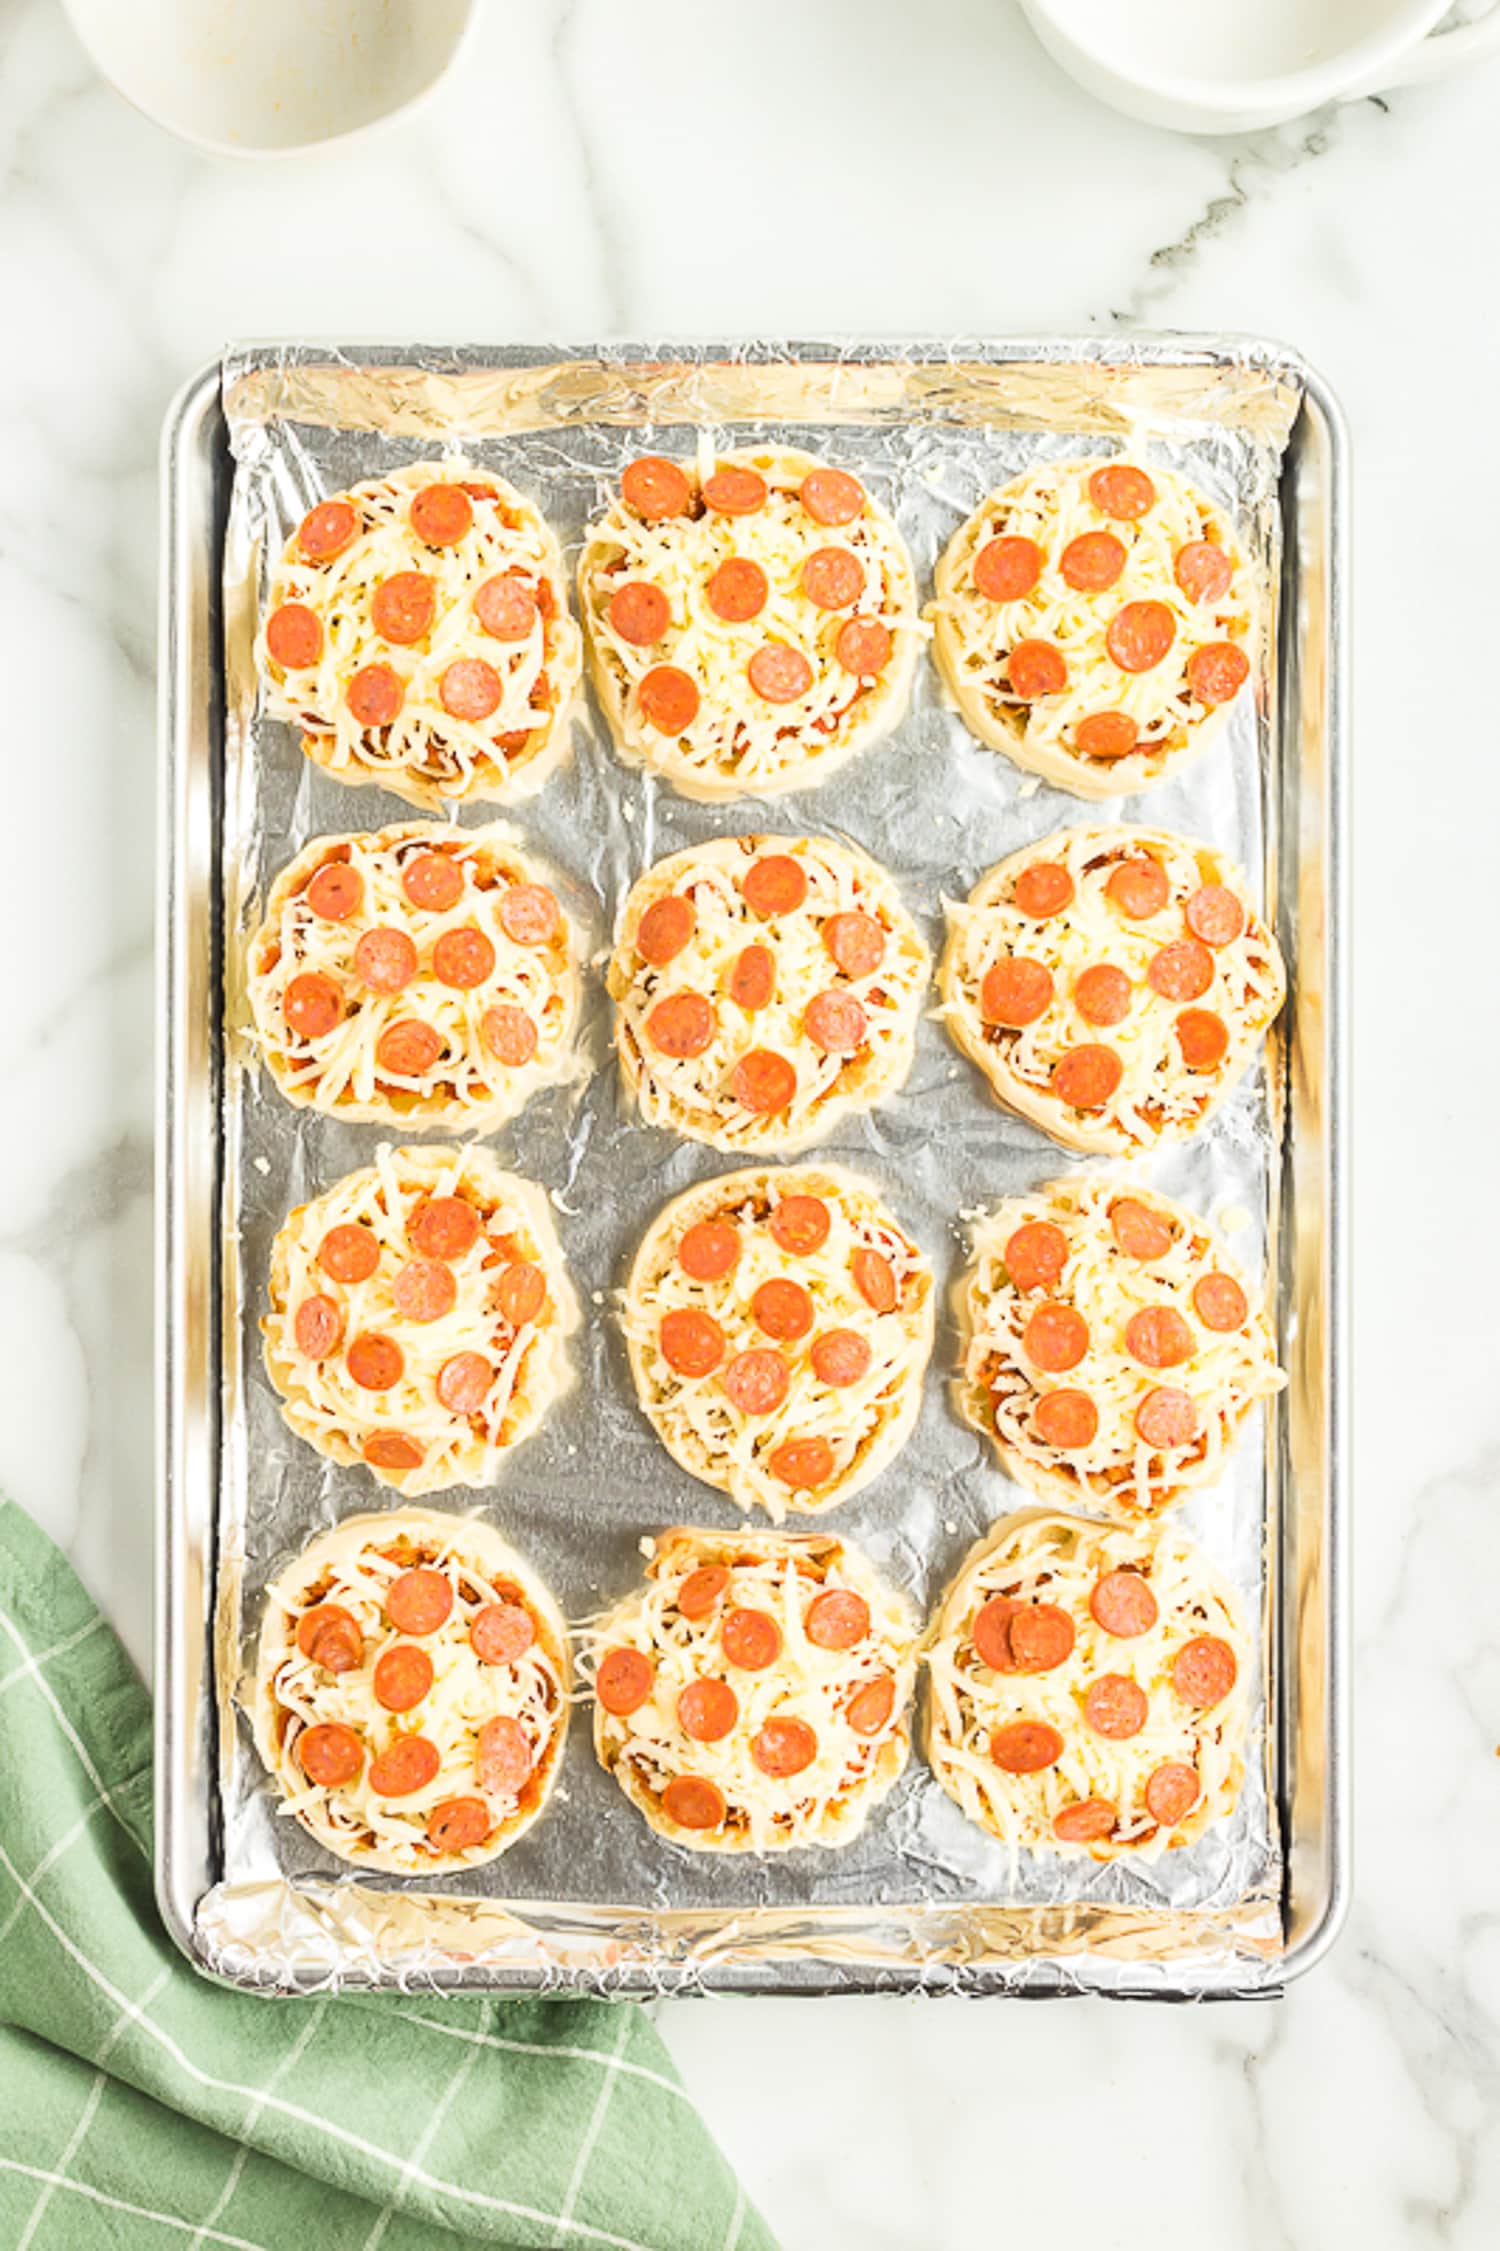 Sheet pan with English Muffin Pizzas before baking